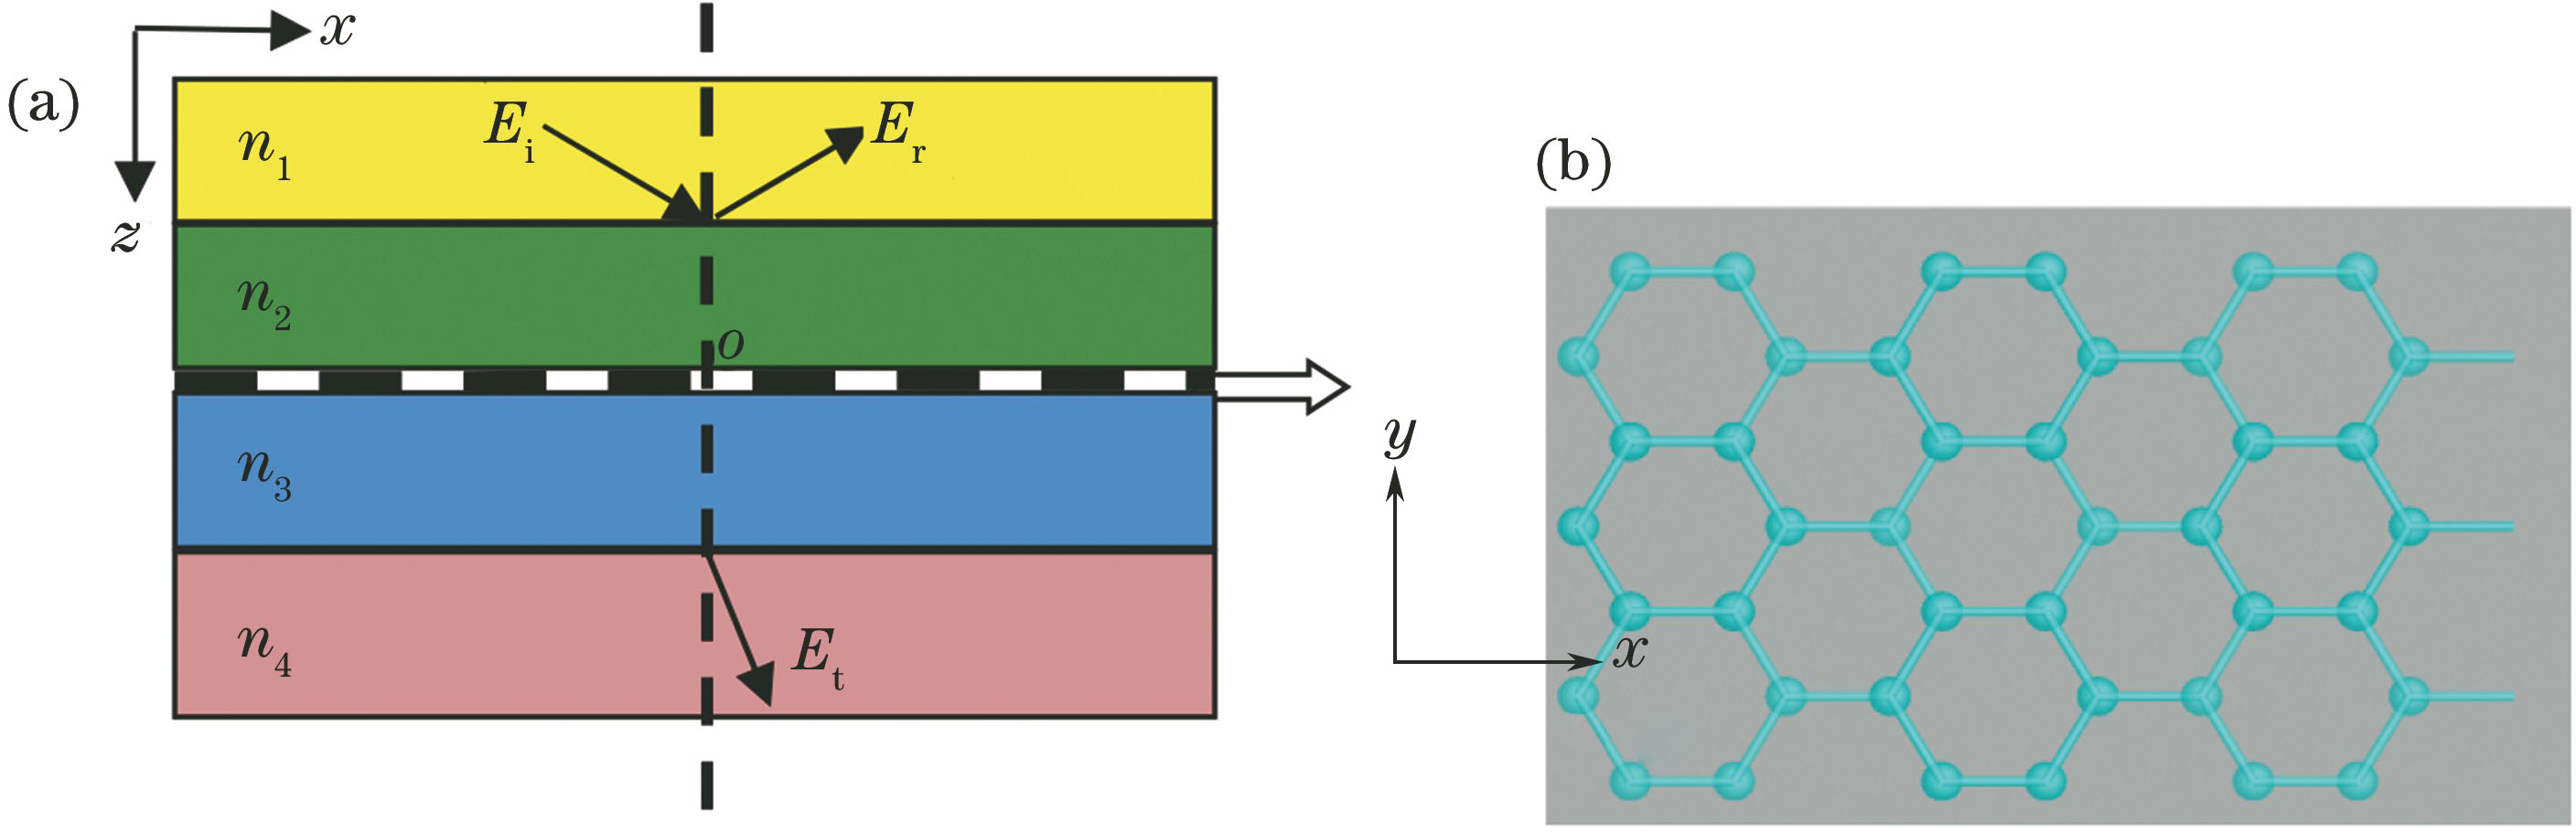 Multi-layer medium composite structure with third order nonlinear graphene sheet. (a) Schematic of incident light, reflection light, and transmission light direction; (b) structure of mono-layer third order nonlinear graphene